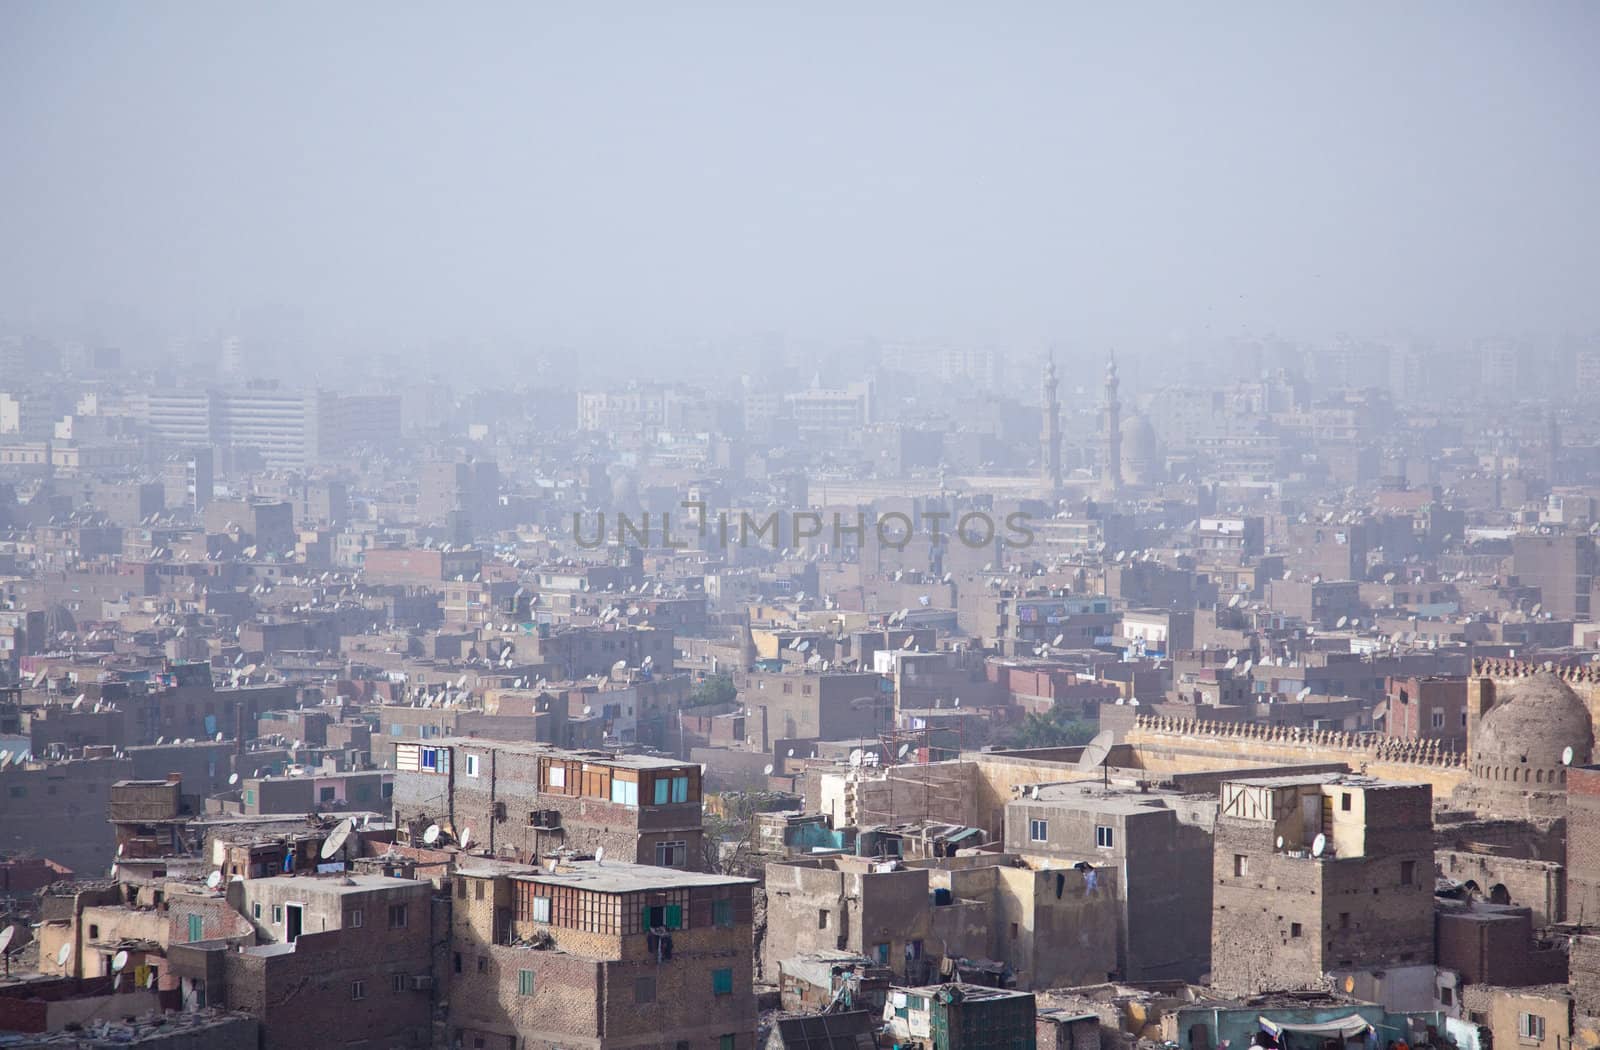 View into a misty city of Cairo in Egypt over roof top slums and mosques